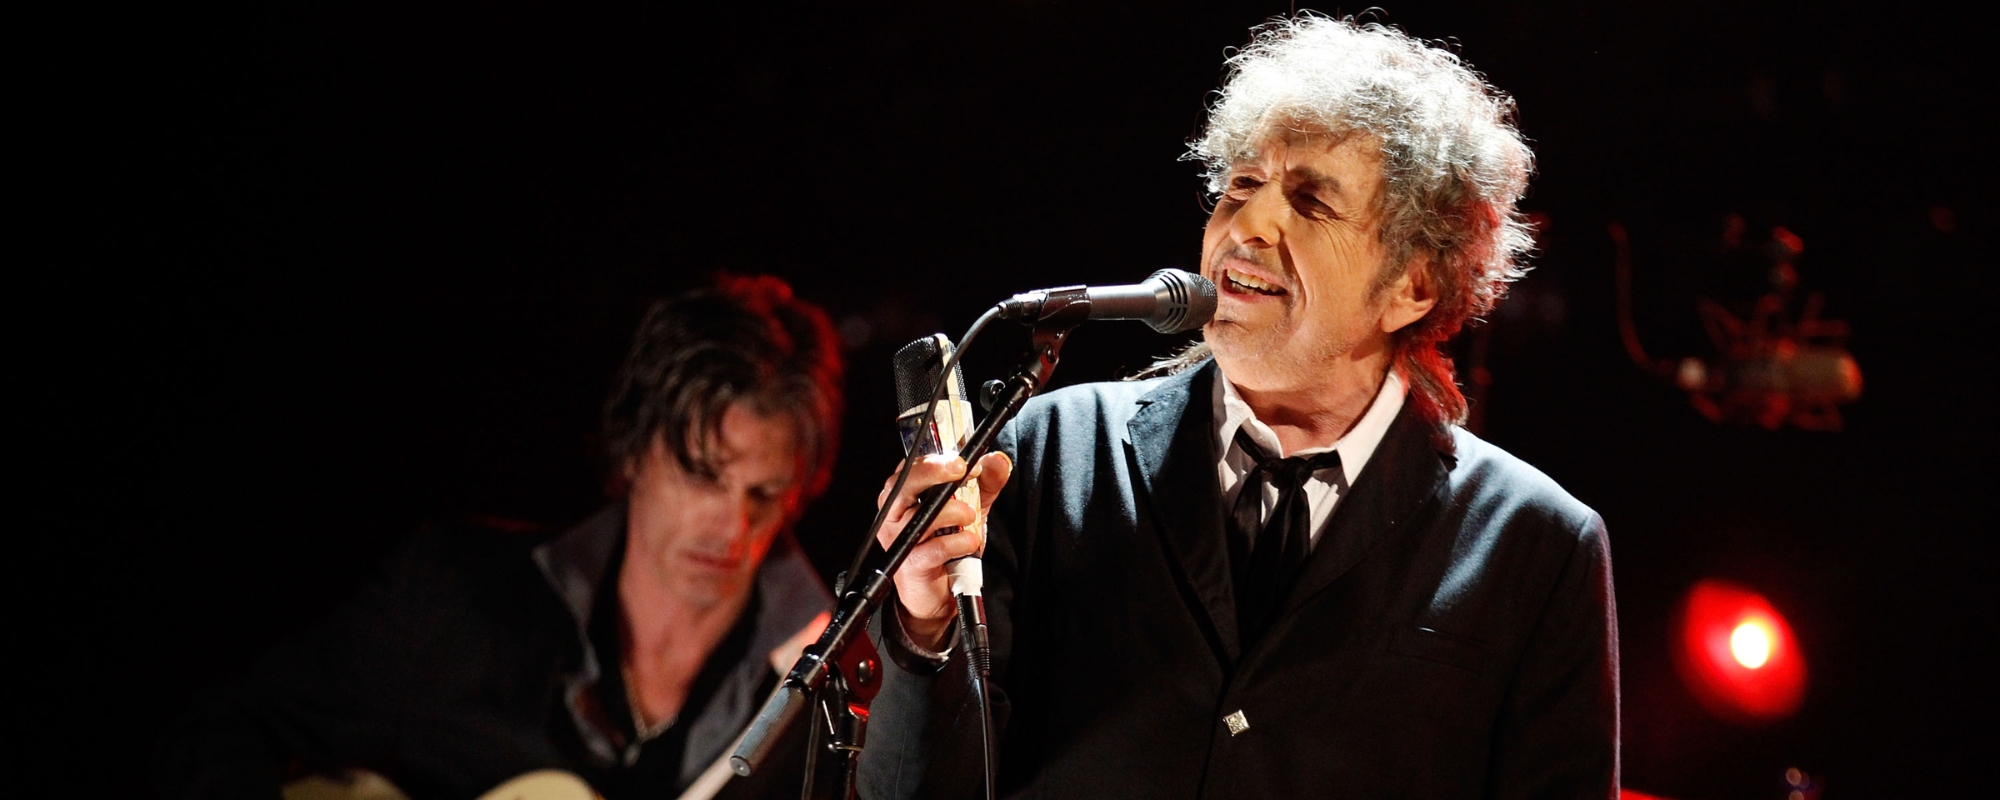 Bob Dylan Has Been Playing City-Specific Covers During Tour to the Delight of Fans